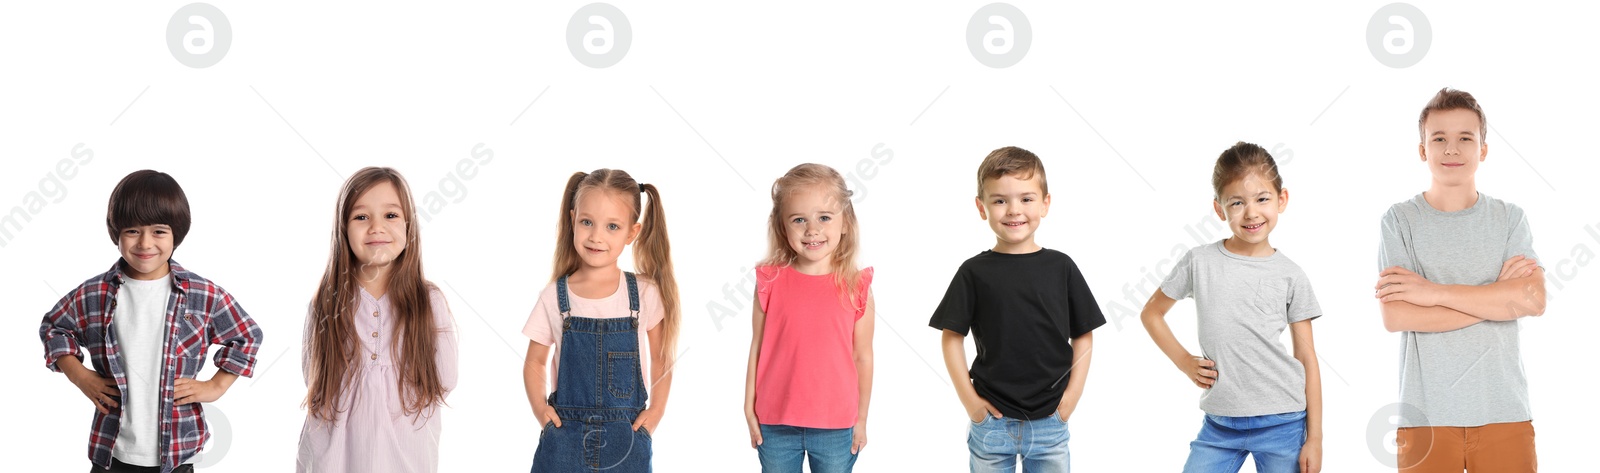 Image of Cheerful children of different ages on white background. Collage design